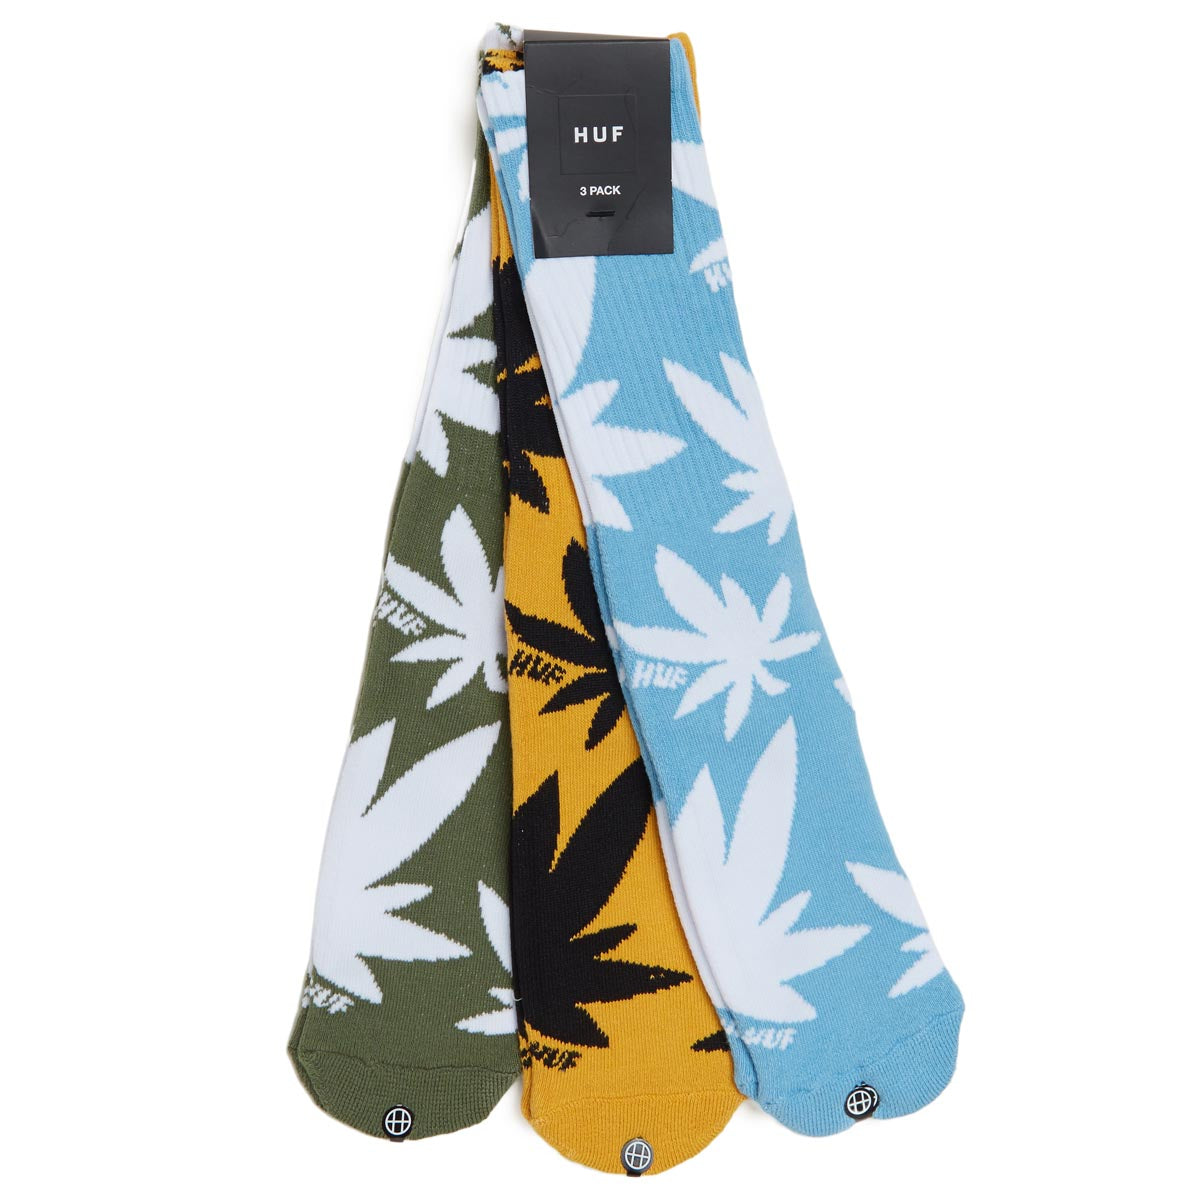 HUF Abstract 3 Pack of Socks - Blue/Yellow/Green image 2